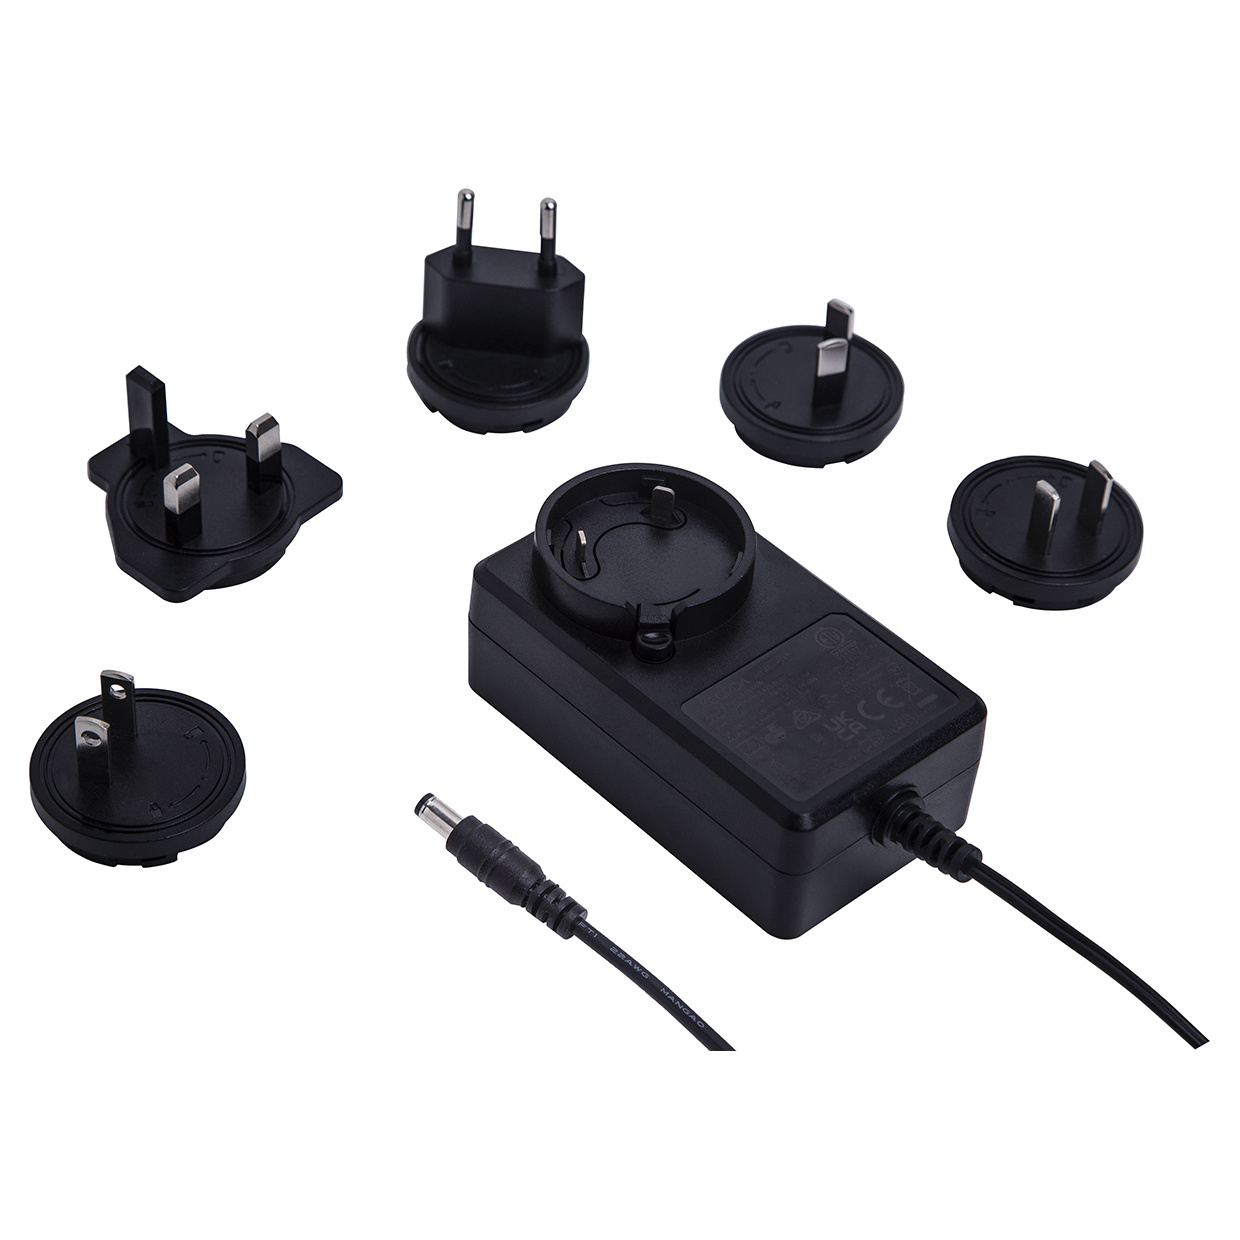 48W 12V4A POWER ADAPTER WITH INTERCHANGEALBLE PLUG